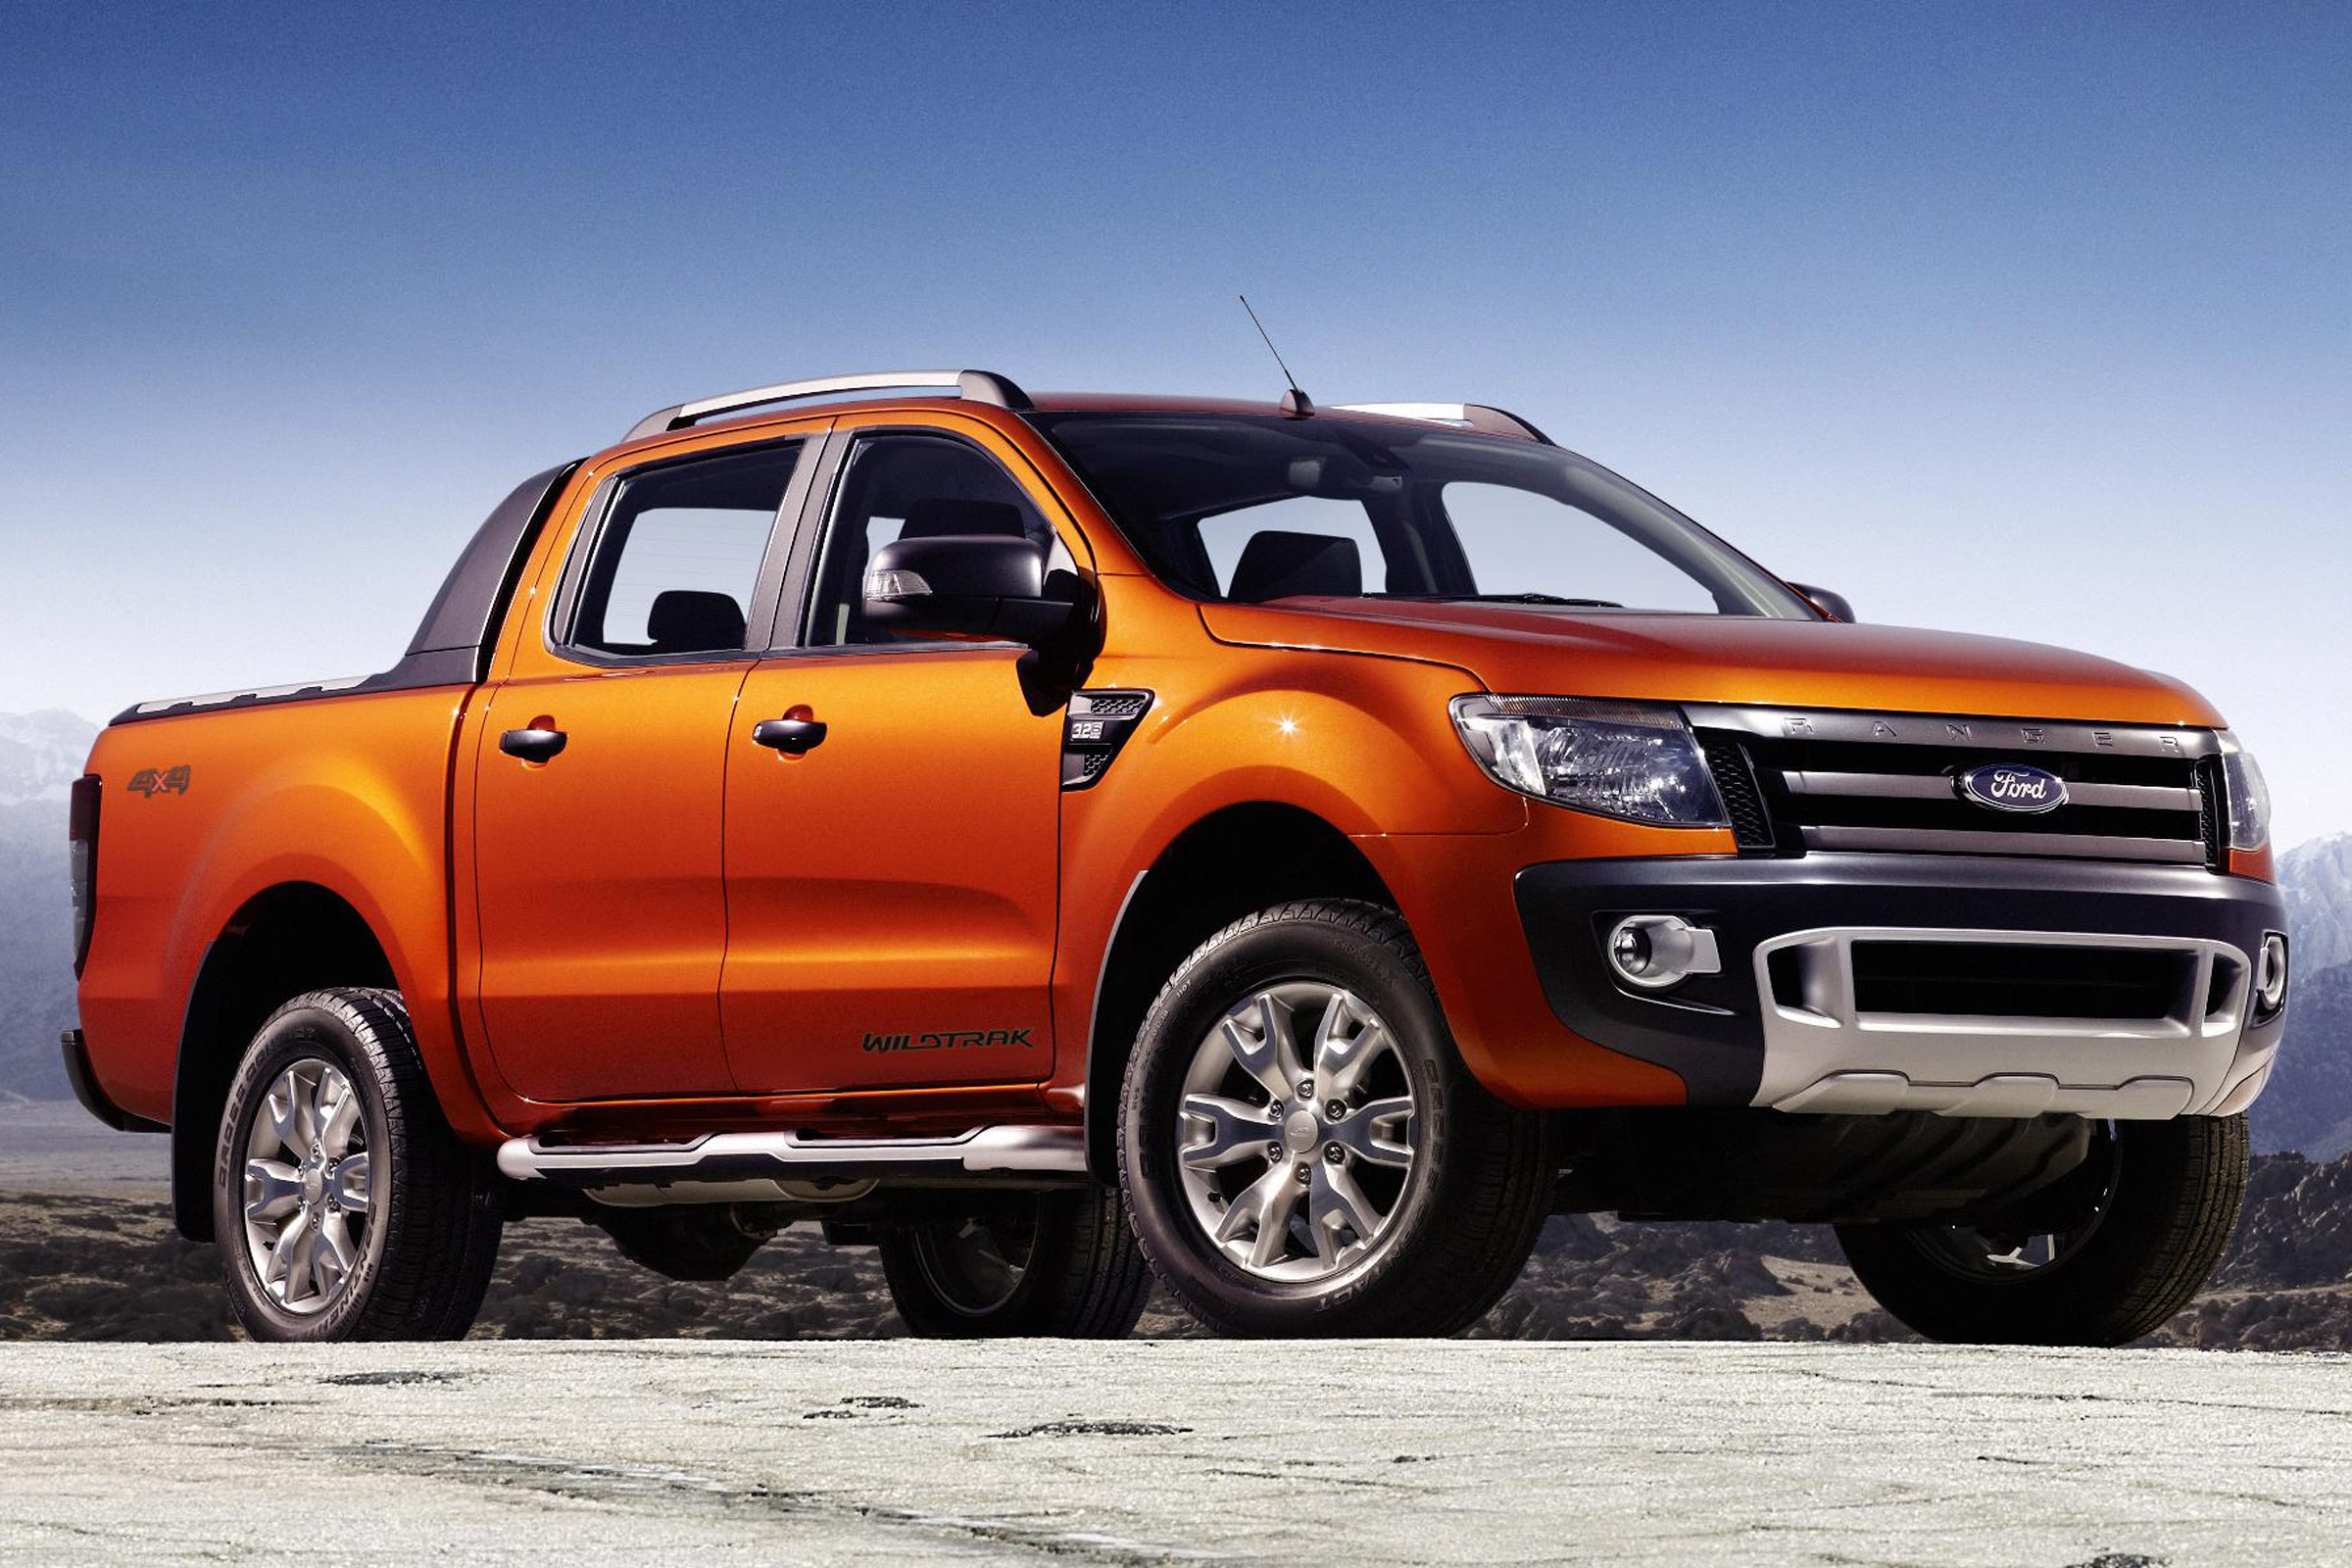 Ford Ranger Wildtrak review: One truck to do it all